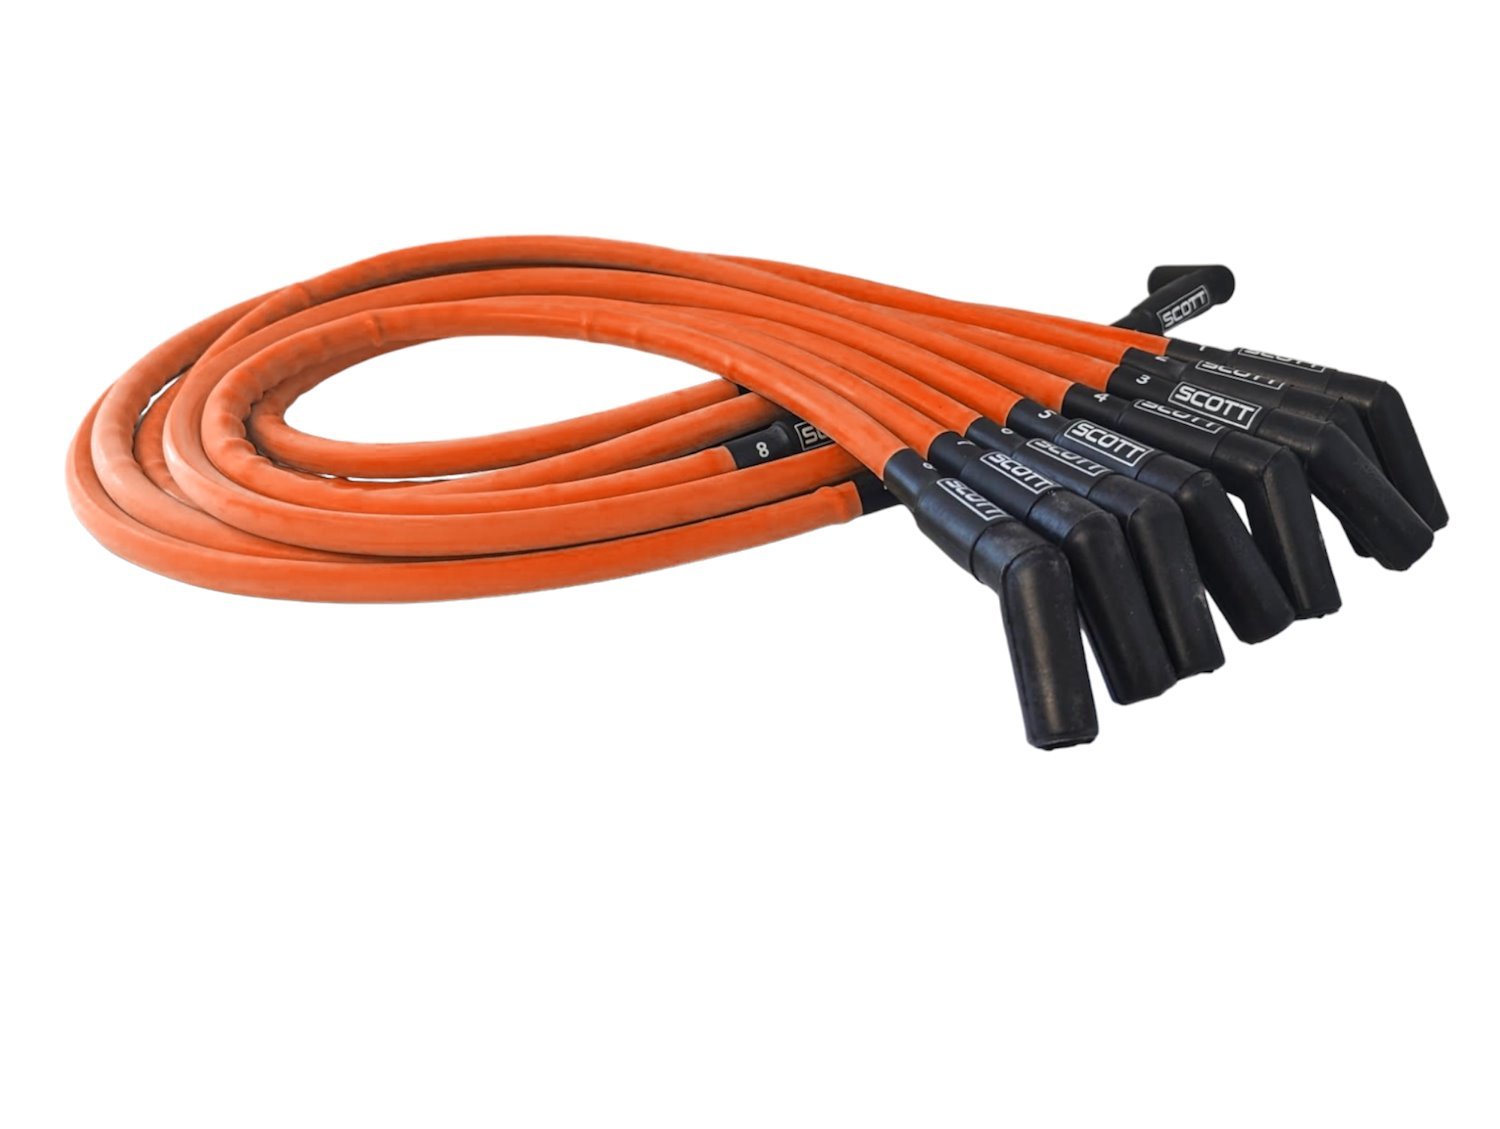 SPW-CH-415-9 High-Performance Silicone-Sleeved Spark Plug Wire Set for Big Block Chevy, Over Valve Cover [Fluorescent Orange]